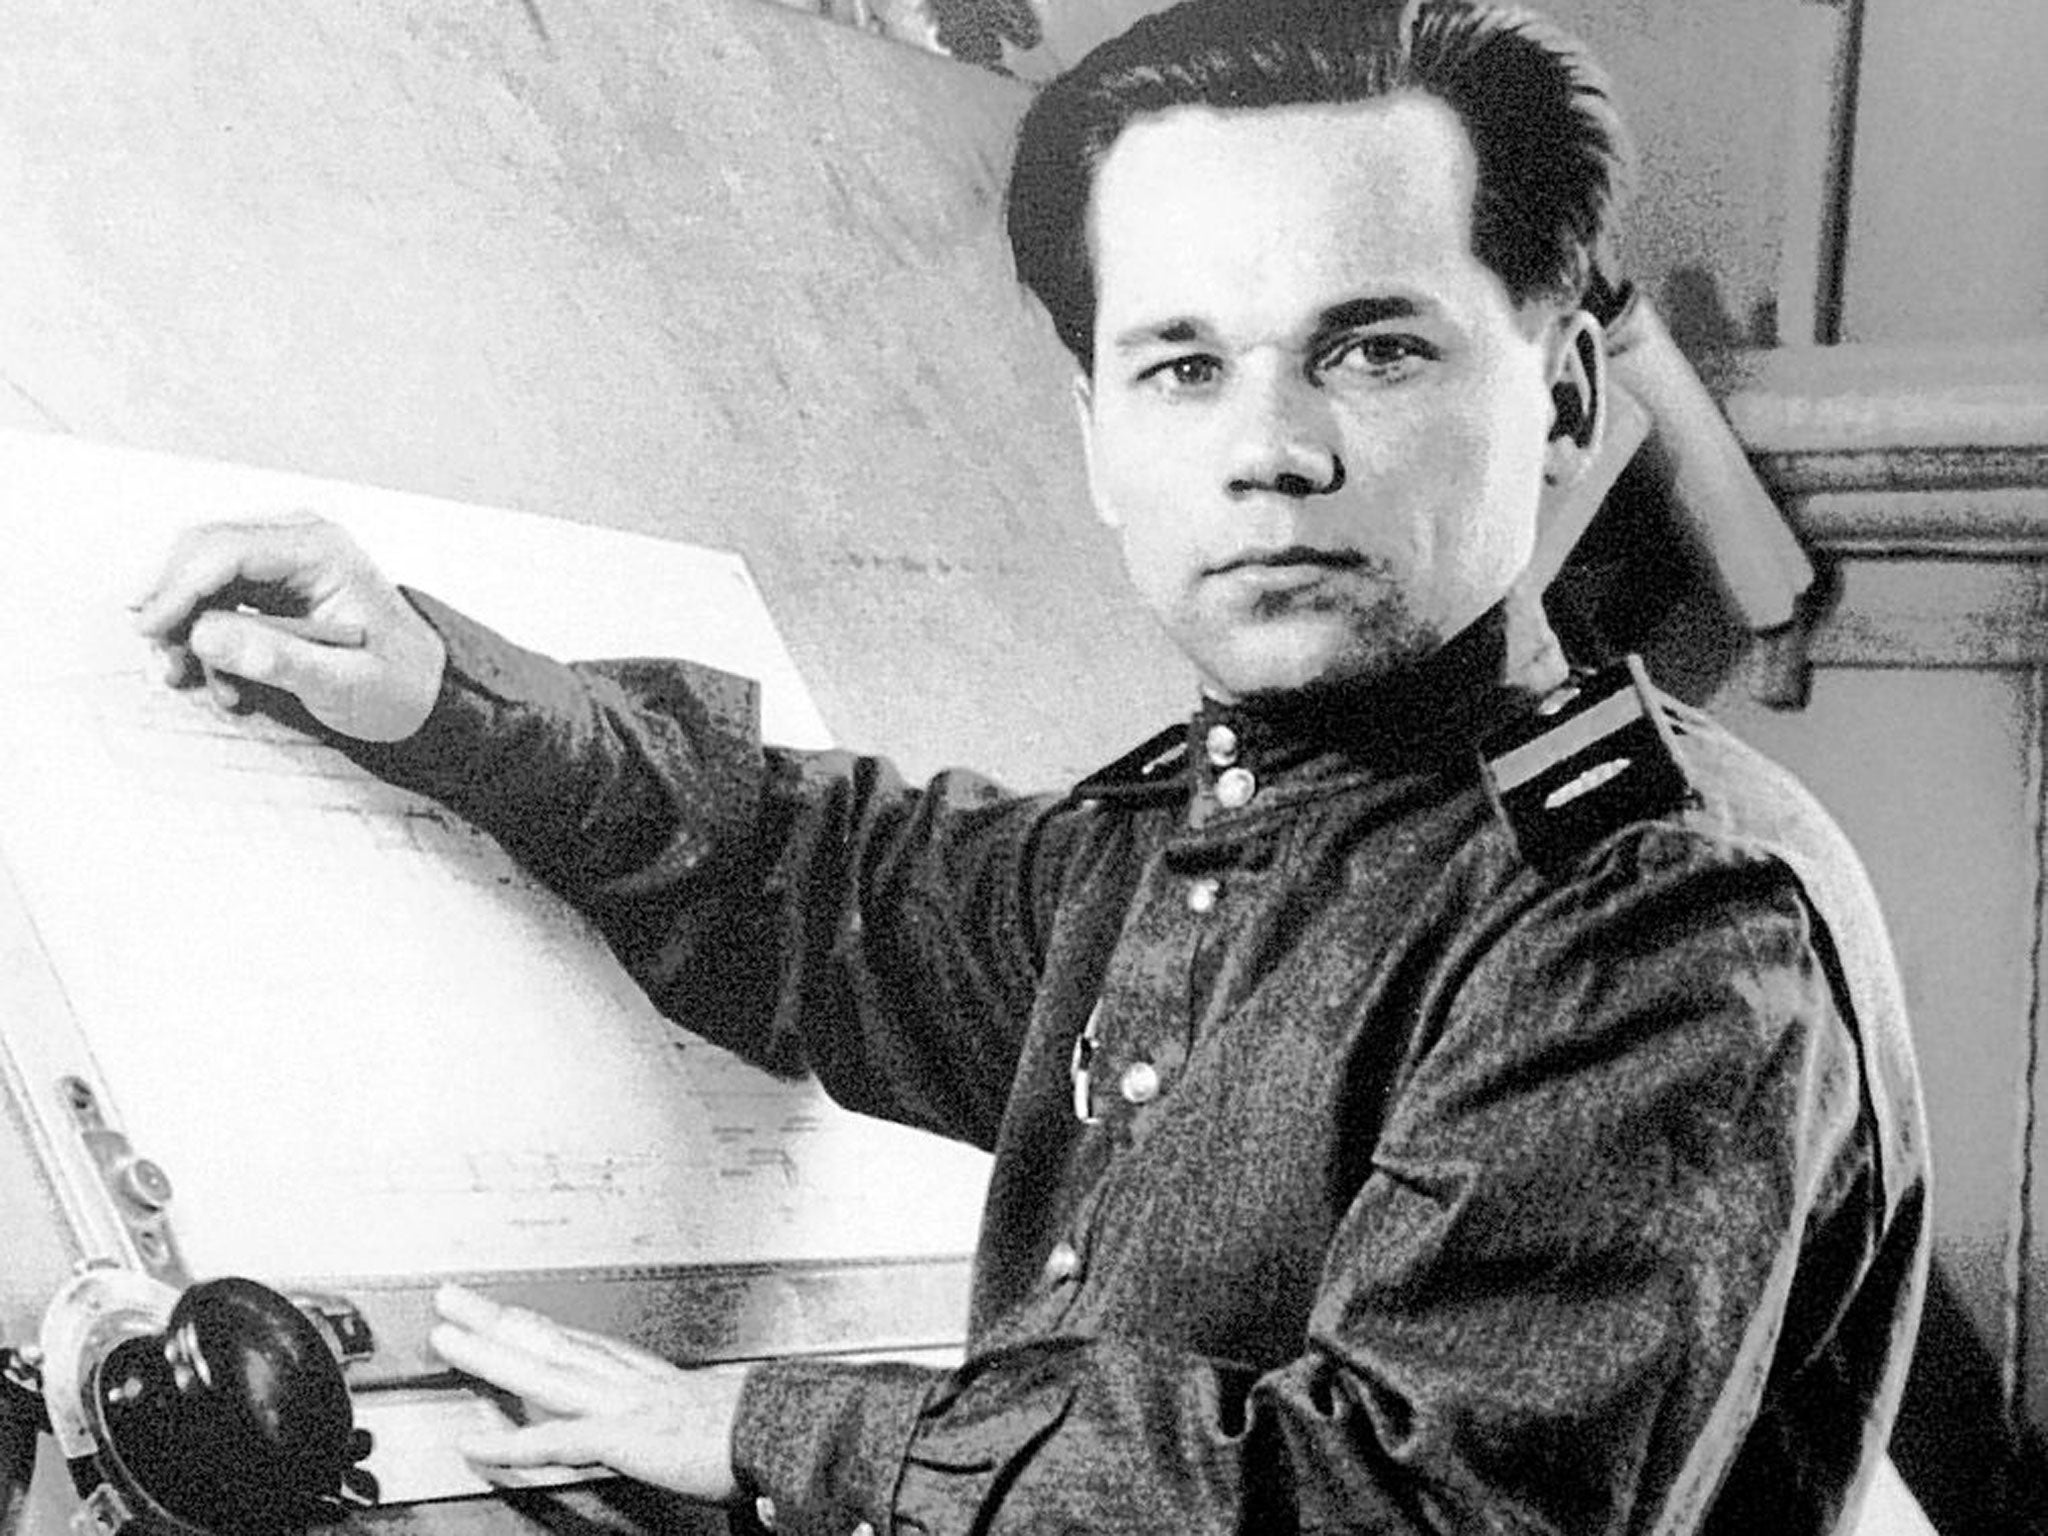 Kalashnikov c. 1949, by which time his gun was standard issue for the Red Army